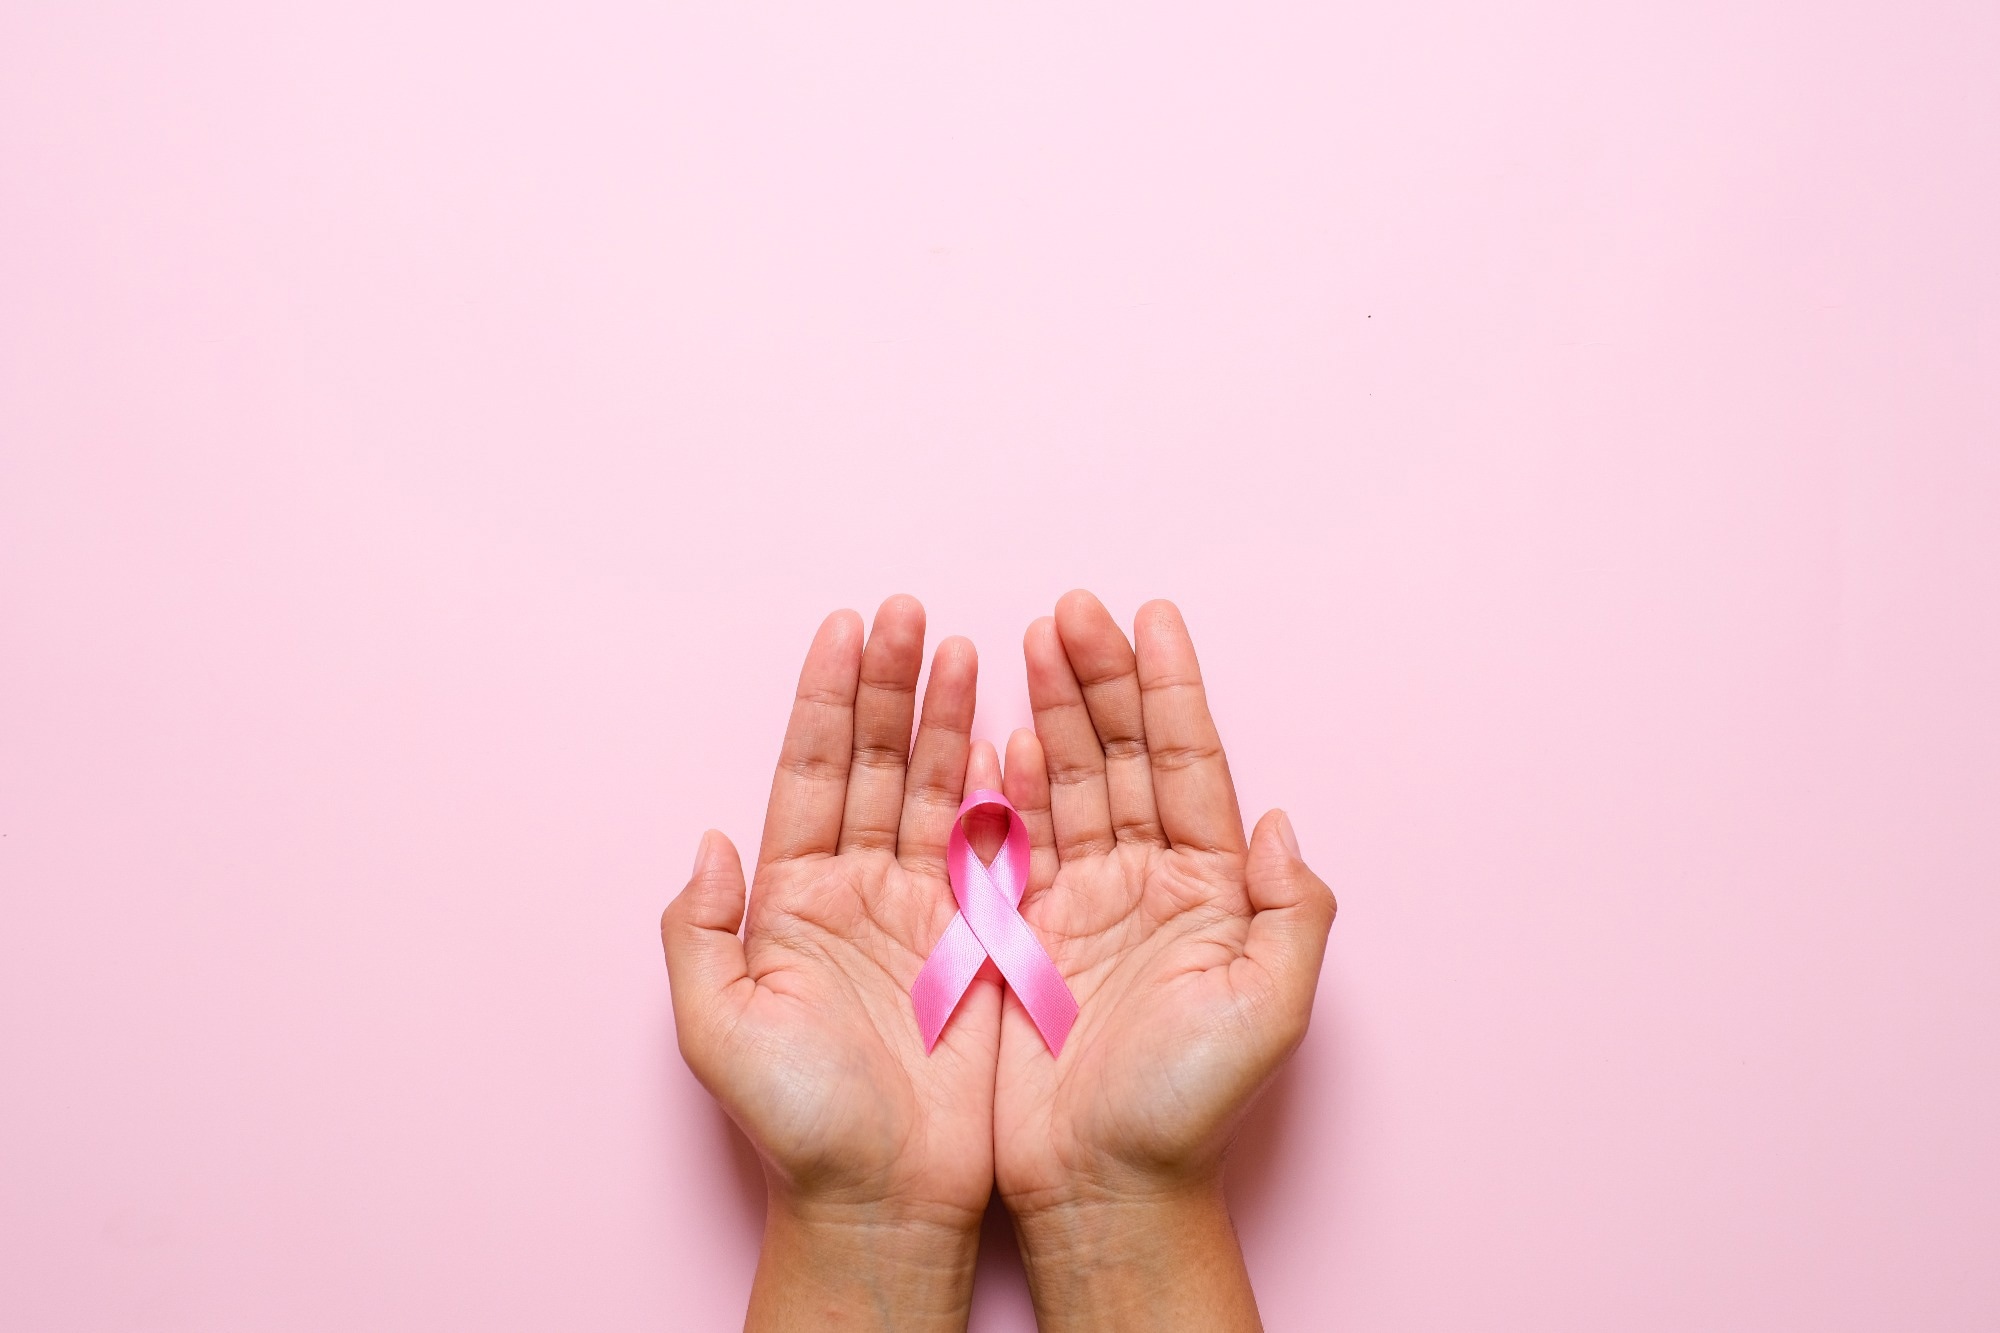 Study: Protective Factors against Fear of Cancer Recurrence in Breast Cancer Patients: A Latent Growth Model. Image Credit: Rembolle/Shutterstock.com